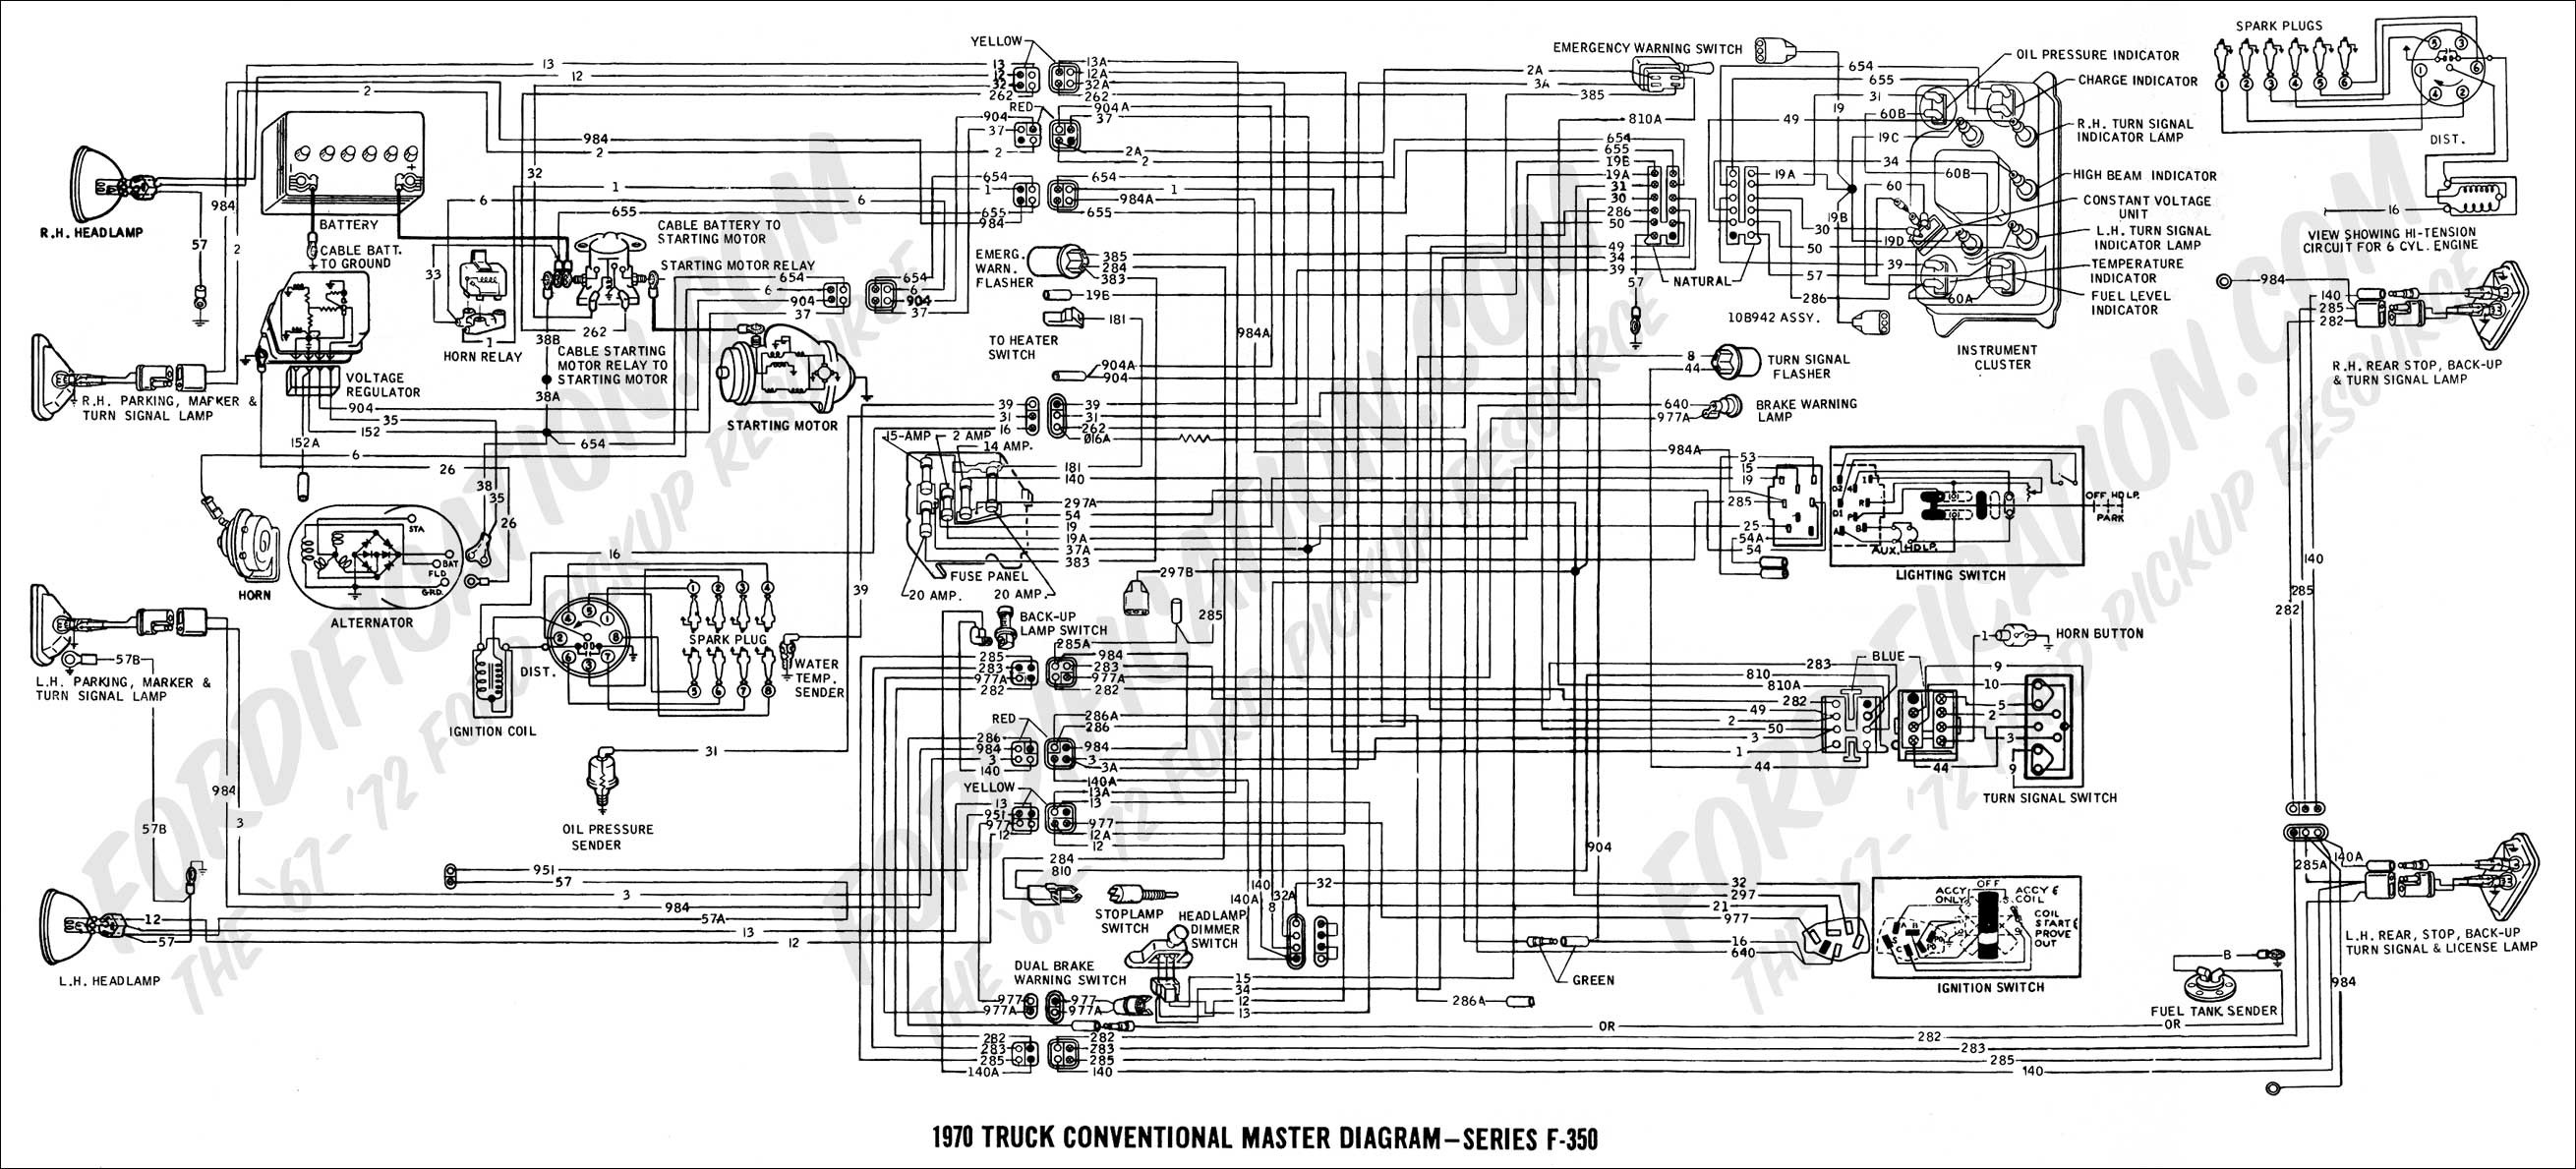 Trailer Wire Harness Diagram 2006 ford Ranger Wiring Diagram 3 Wiring Diagram Of Trailer Wire Harness Diagram